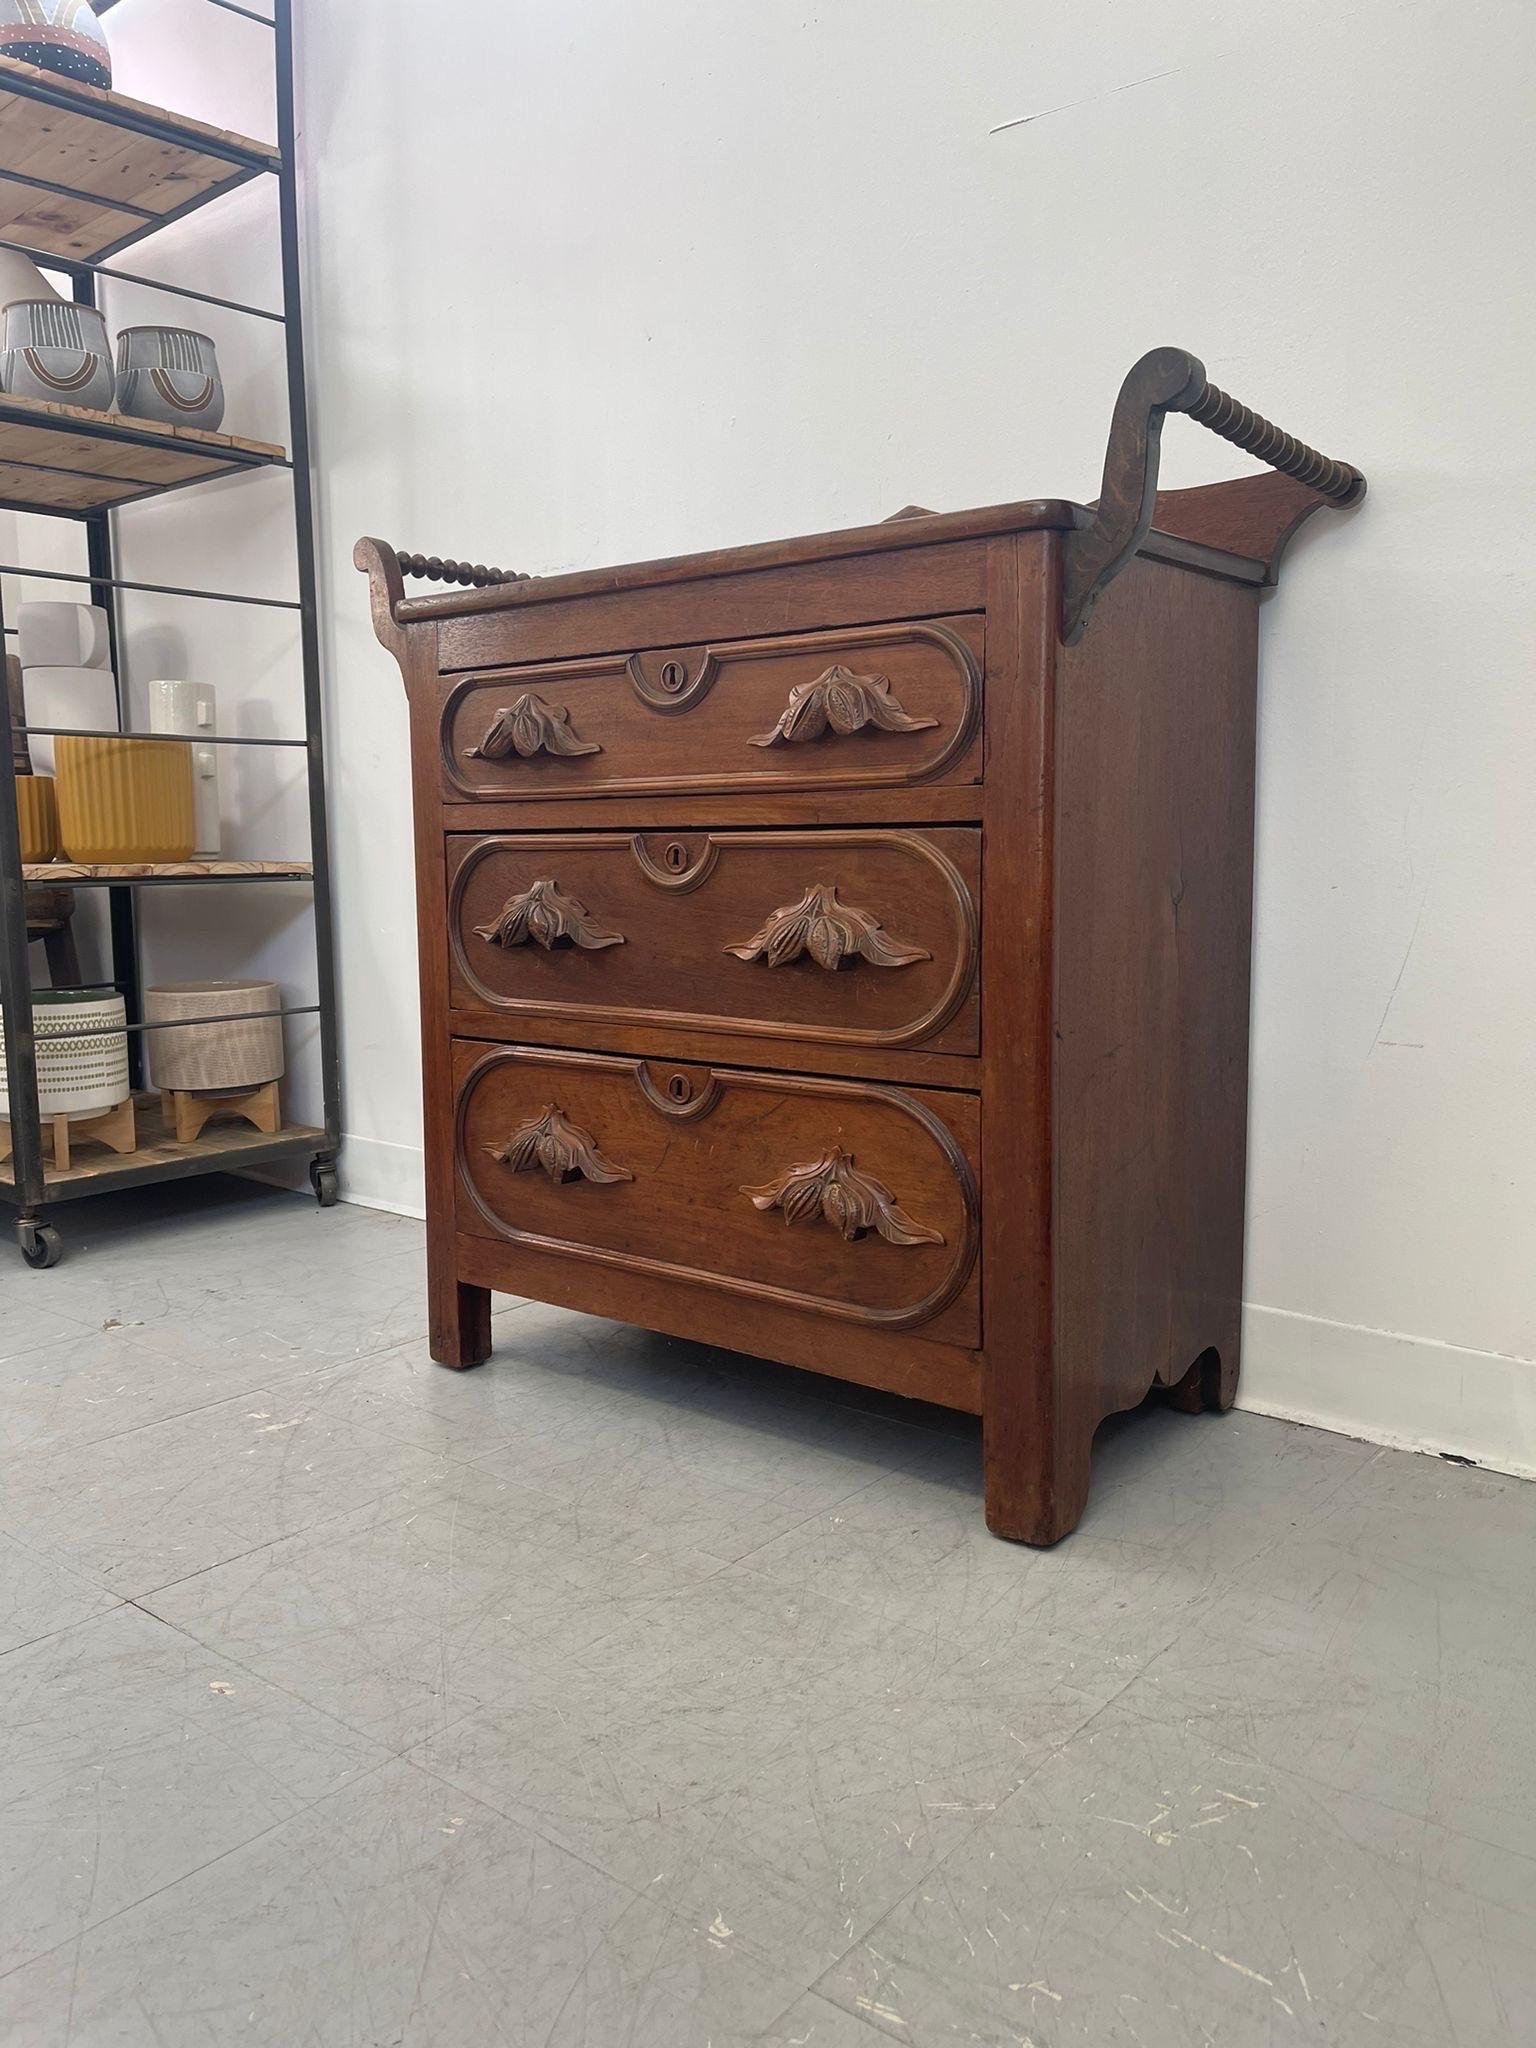 Possibly Circa 1860s.  This dresser has beautiful Walnut and leaf carved handles. Three hand cut dovetailed drawers. Appears to be hand panes. Wood carved details throughout. Vintage Condition Consistent with Age as Pictured. 

Dimensions. 36 W ; 16